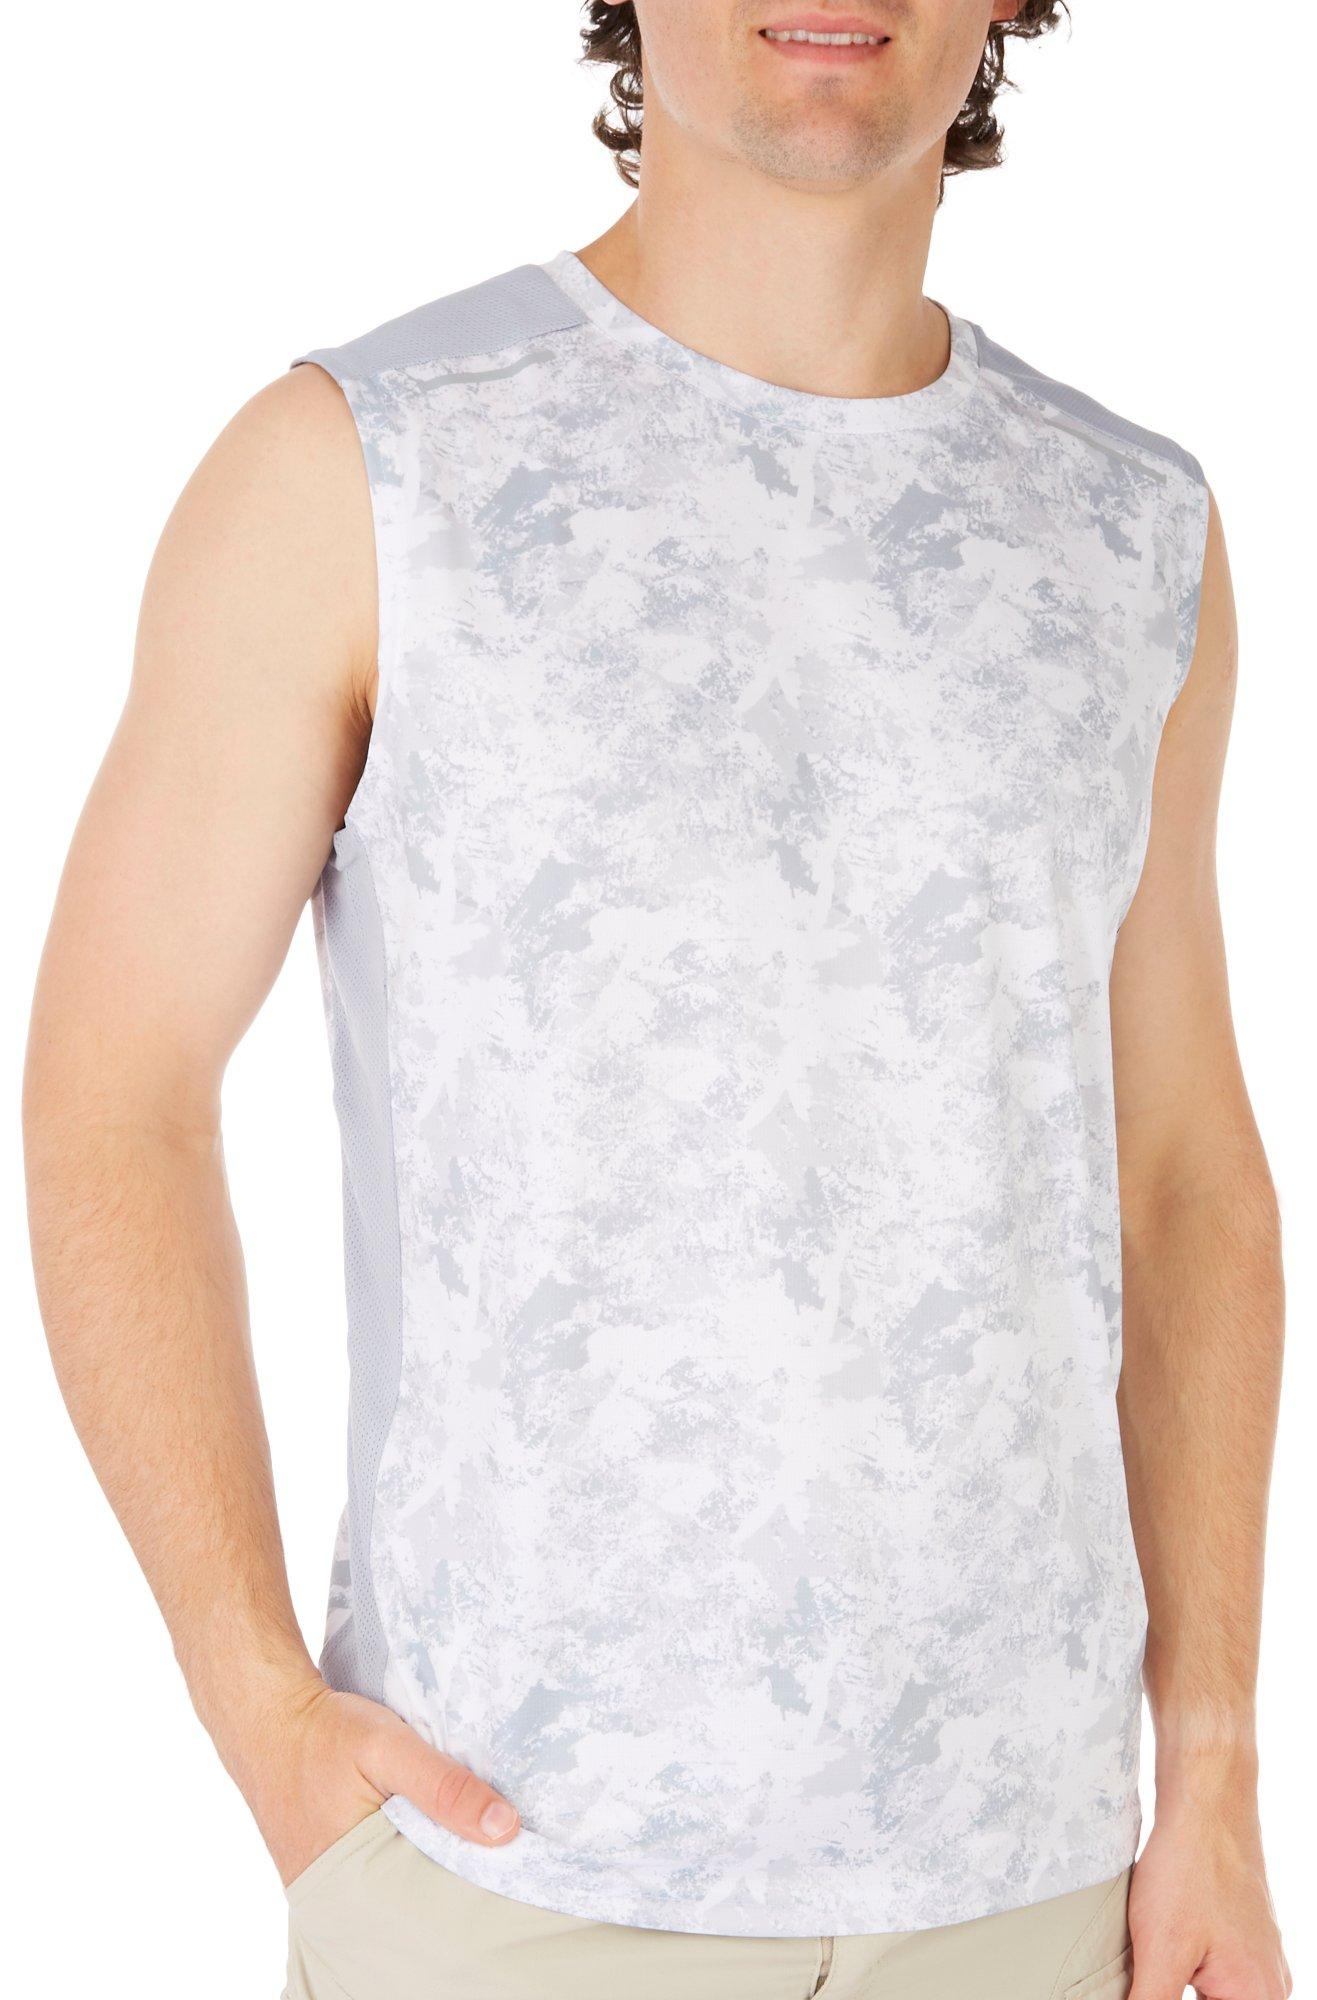 Mens Performance Camo Vented Muscle Tank